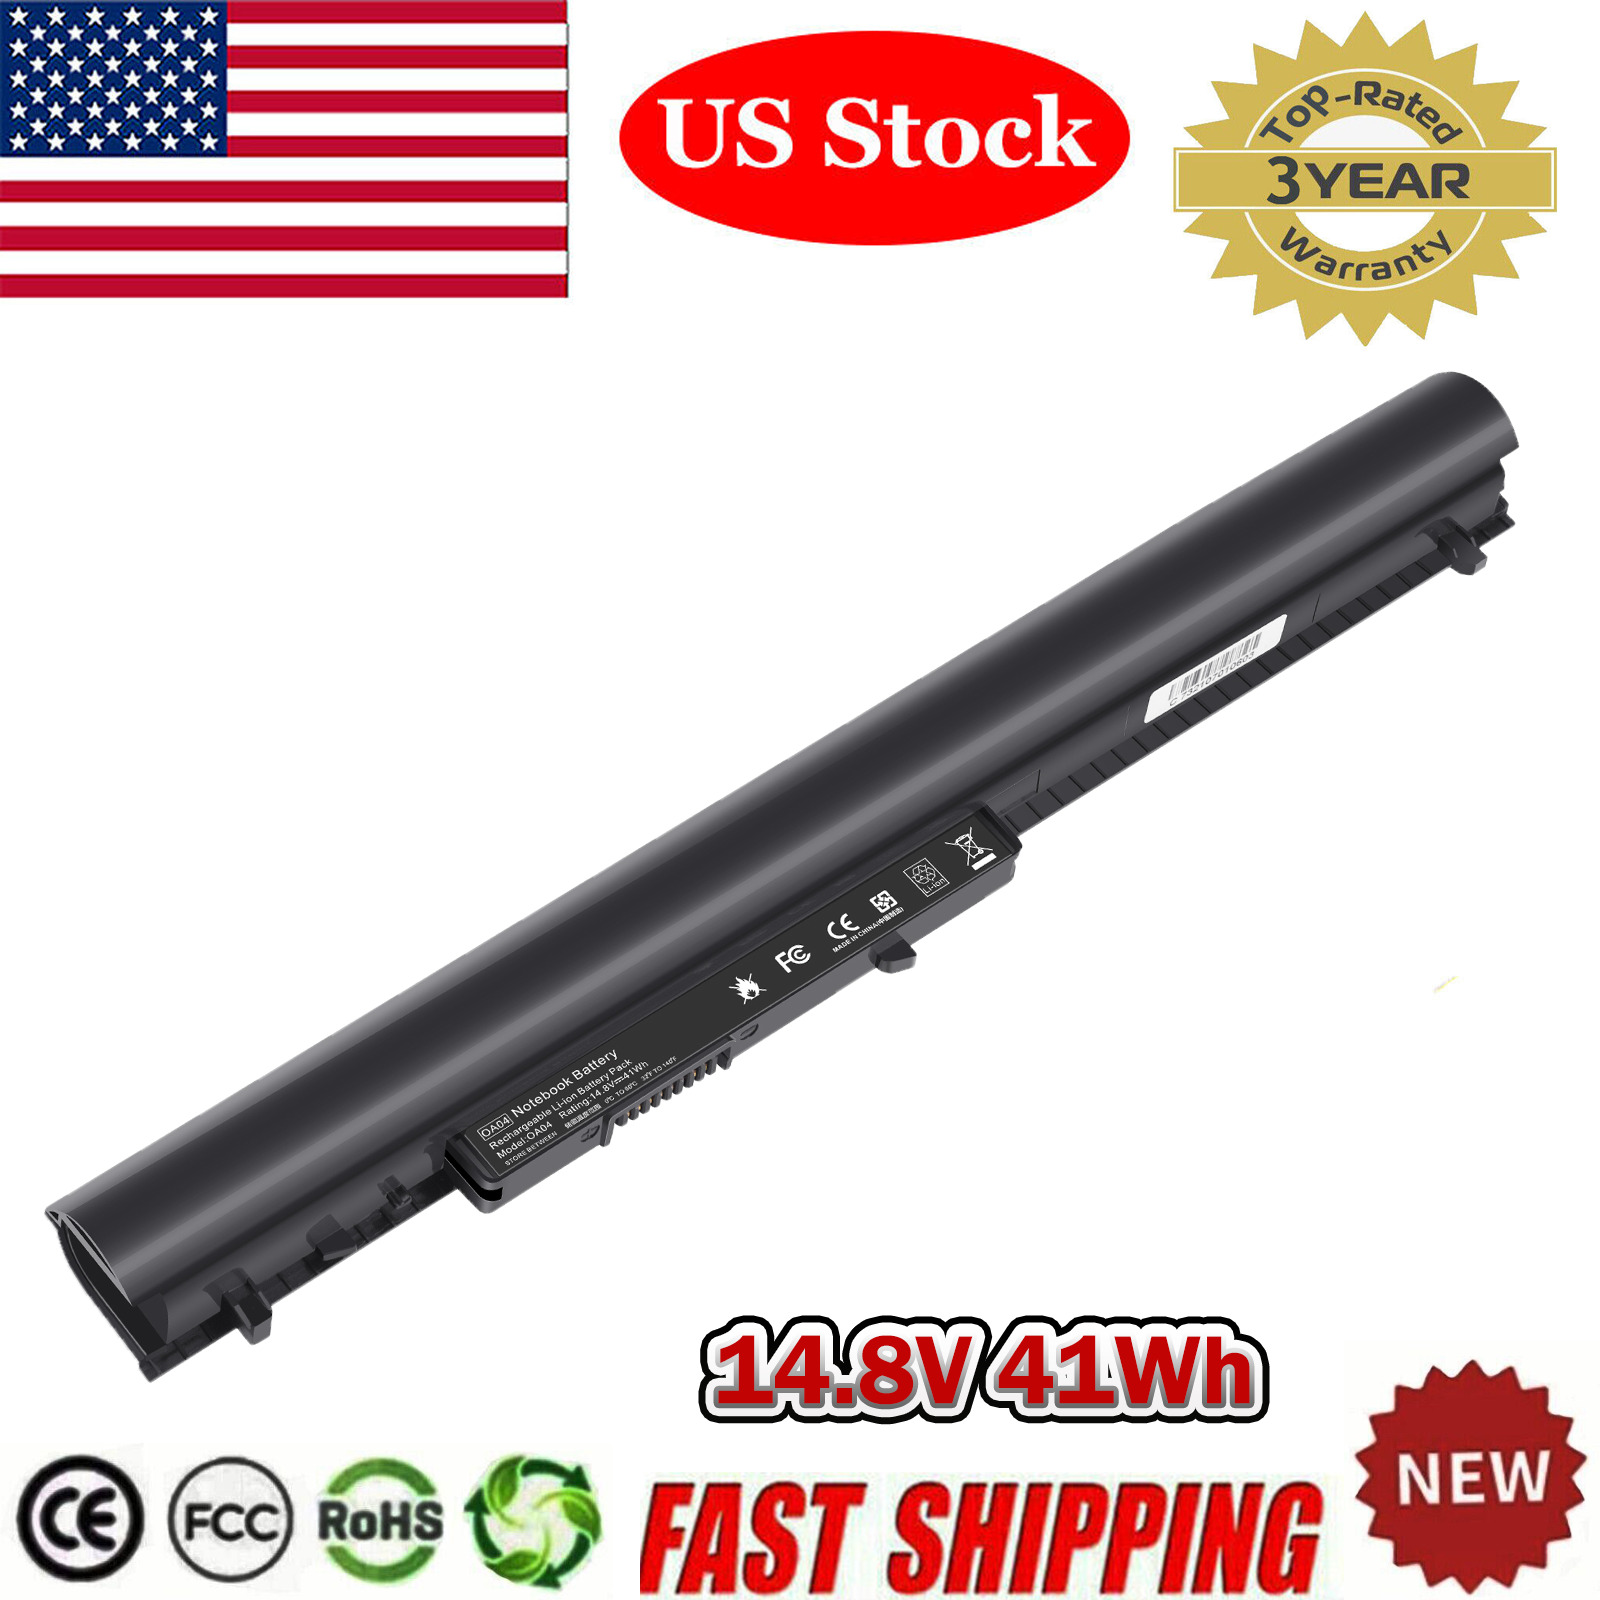 4 Cells Spare 746641-001 Battery For HP OA03 OA04 740715-001 746458-421 41Wh 